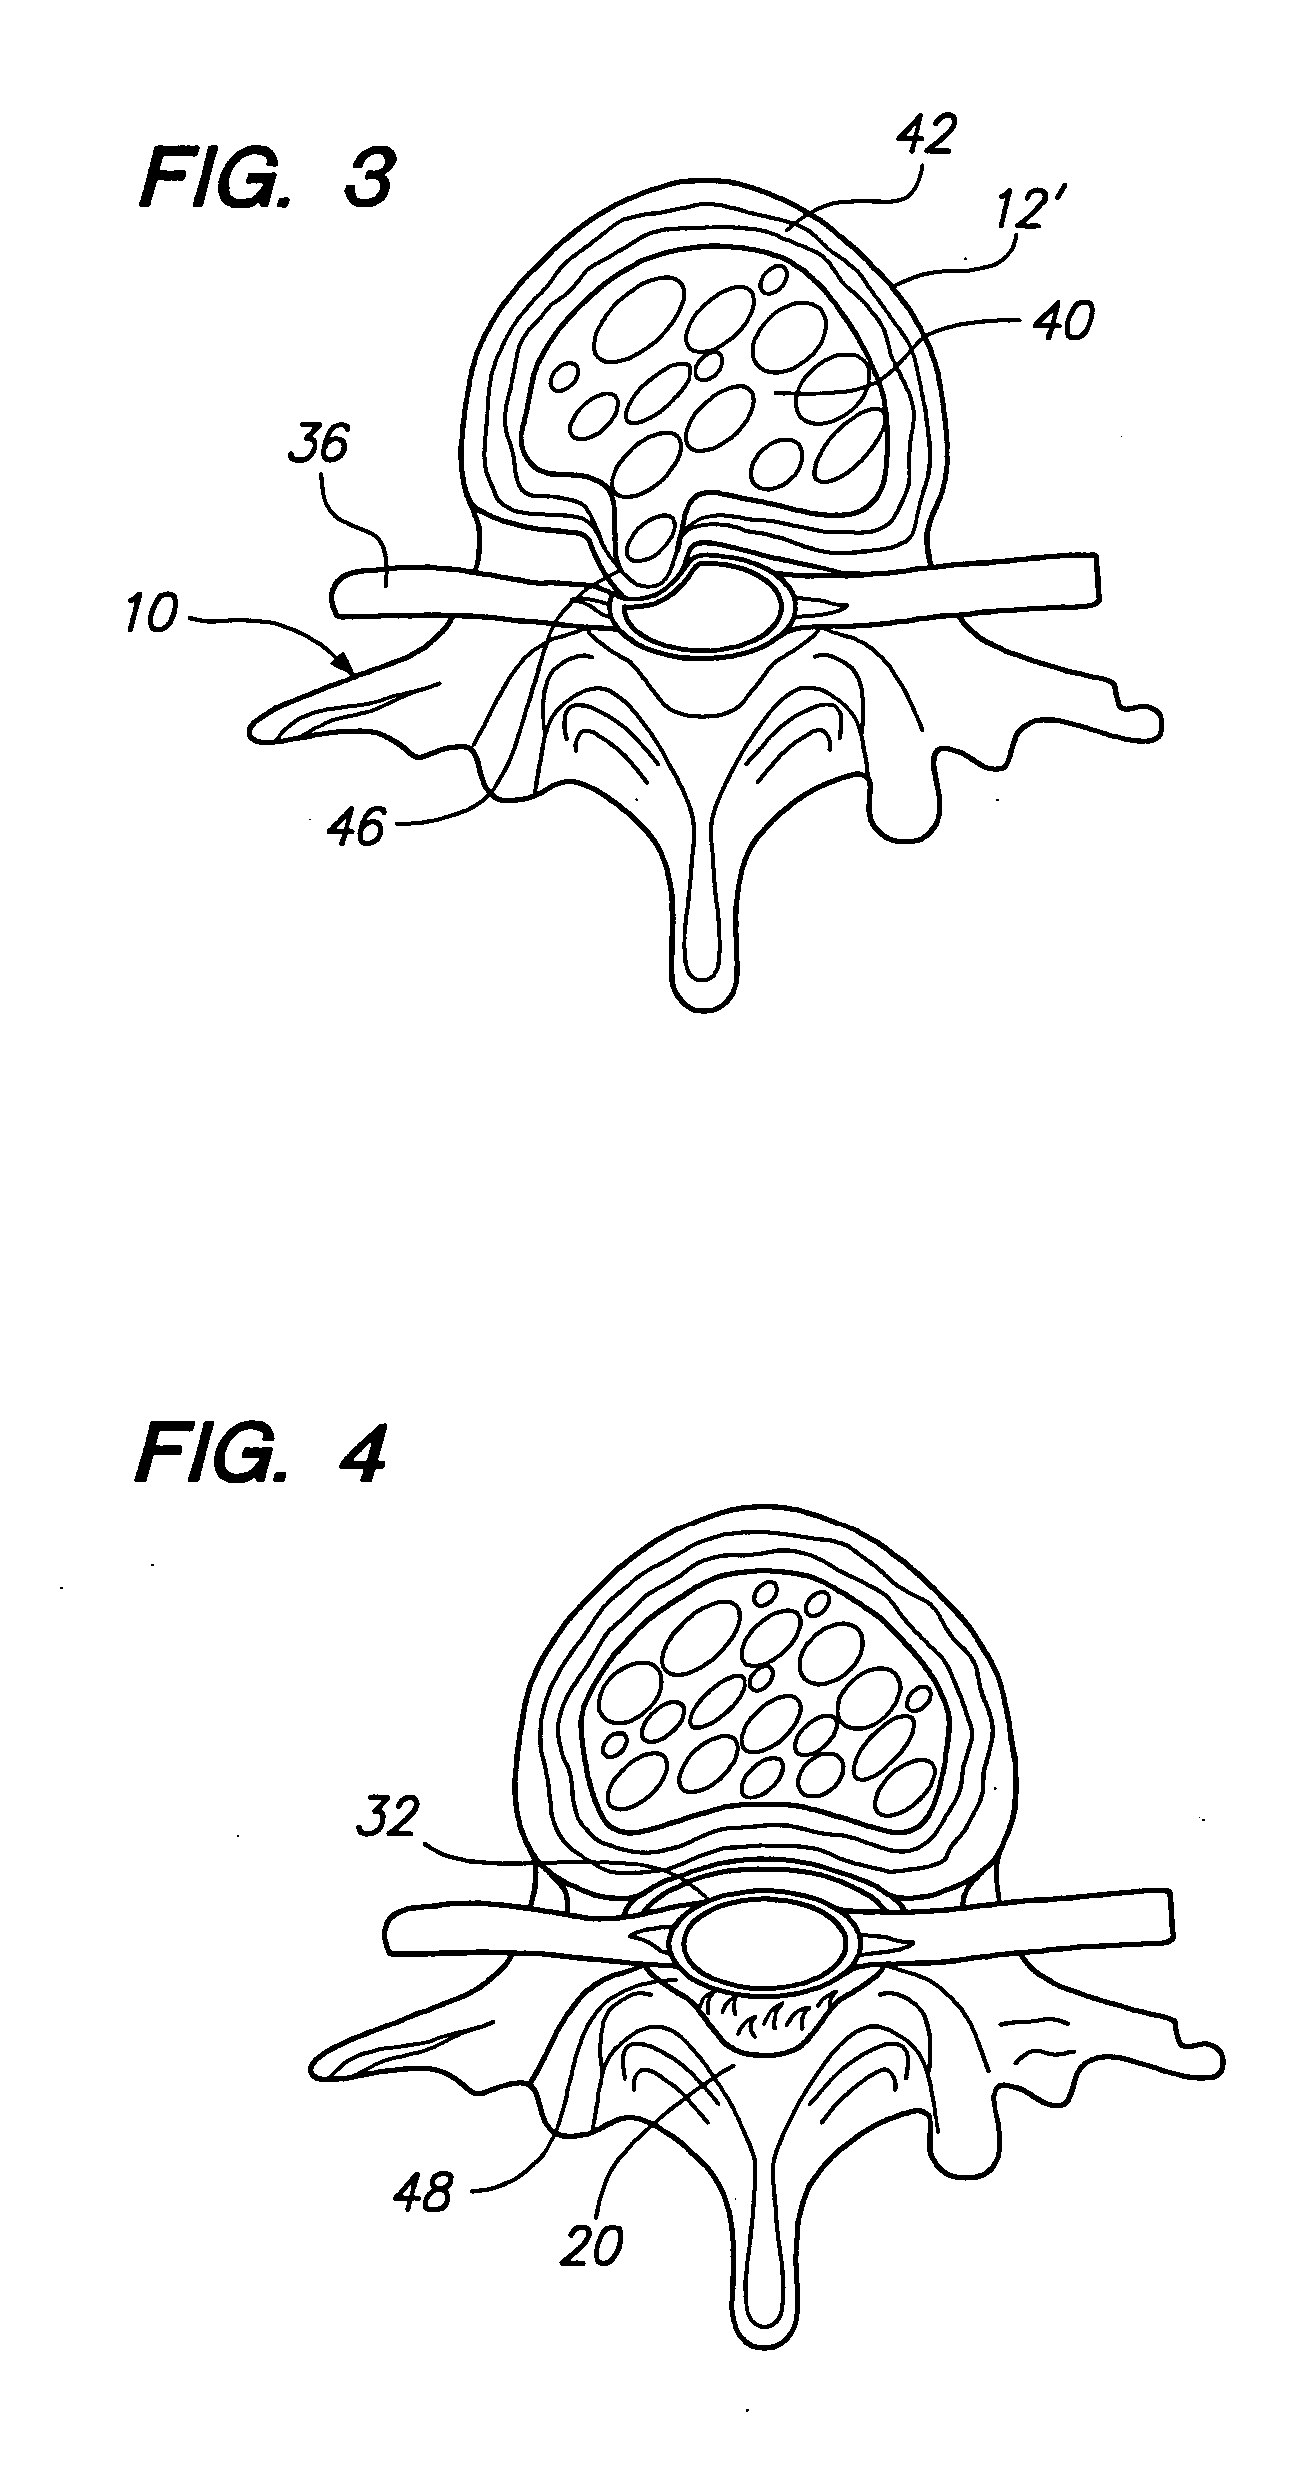 Tissue removal probe with irrigation and aspiration ports